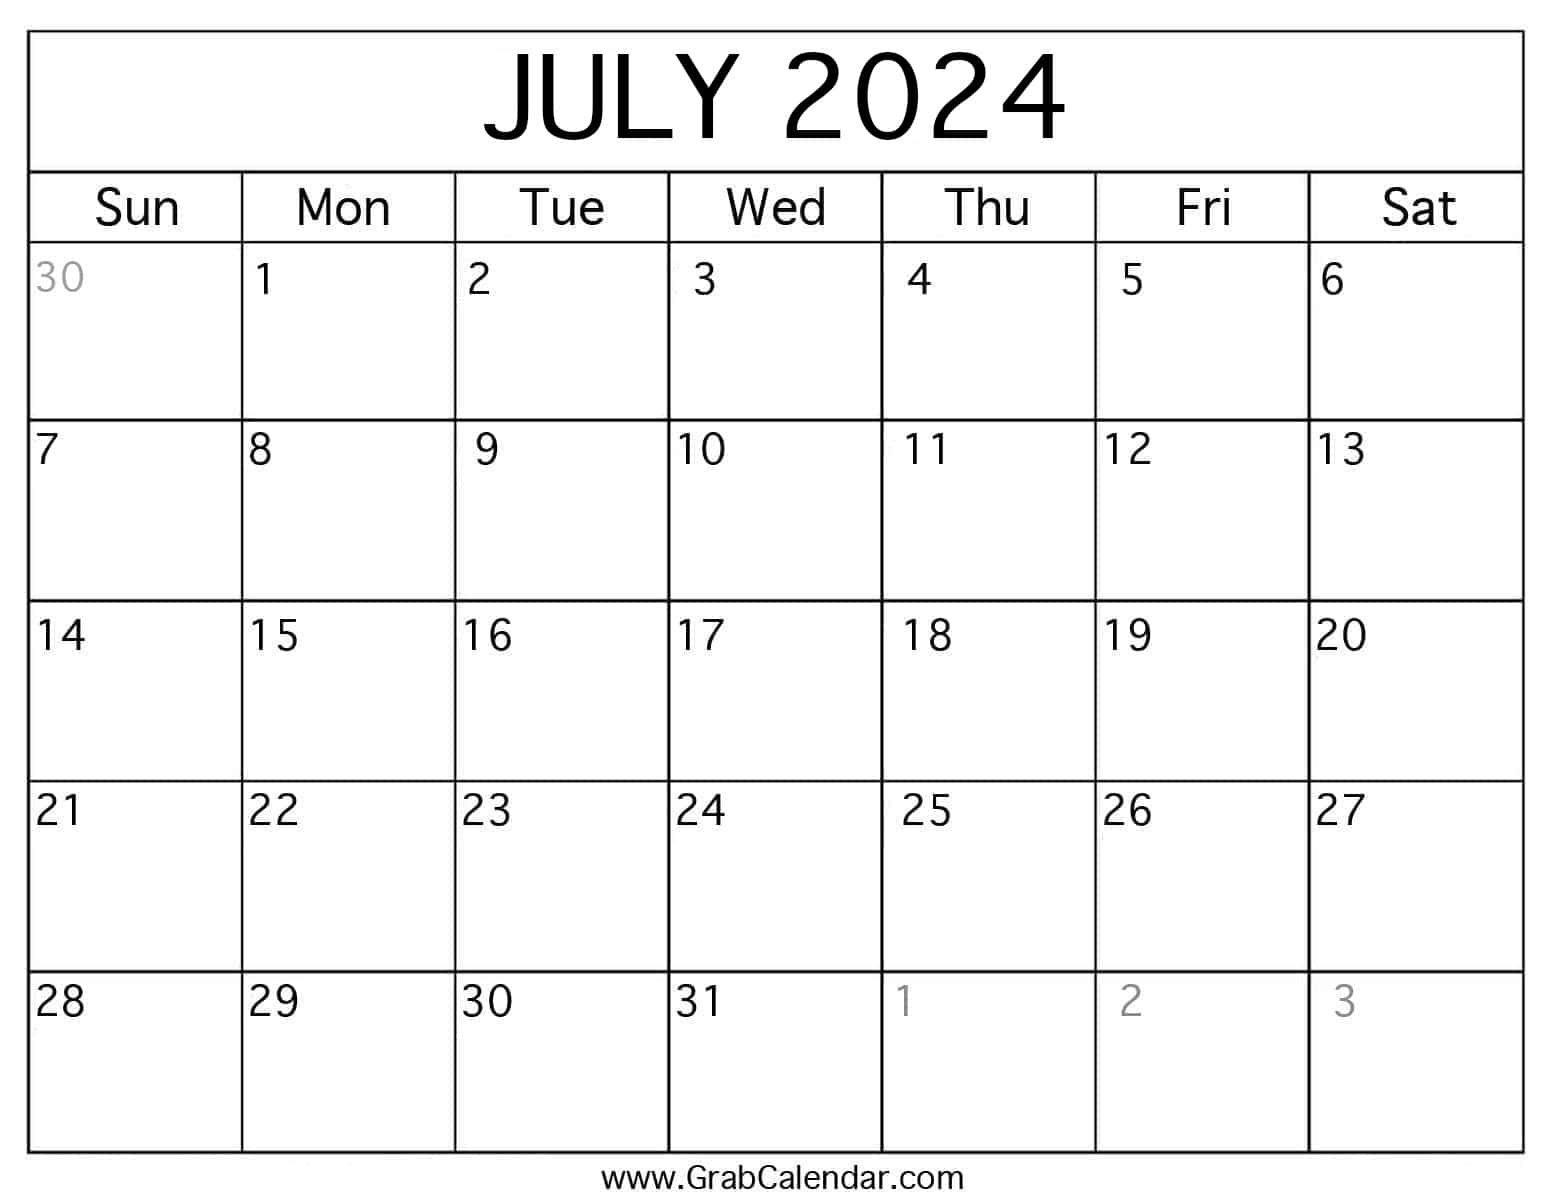 Printable July 2024 Calendar | July Calendar With Events 2024